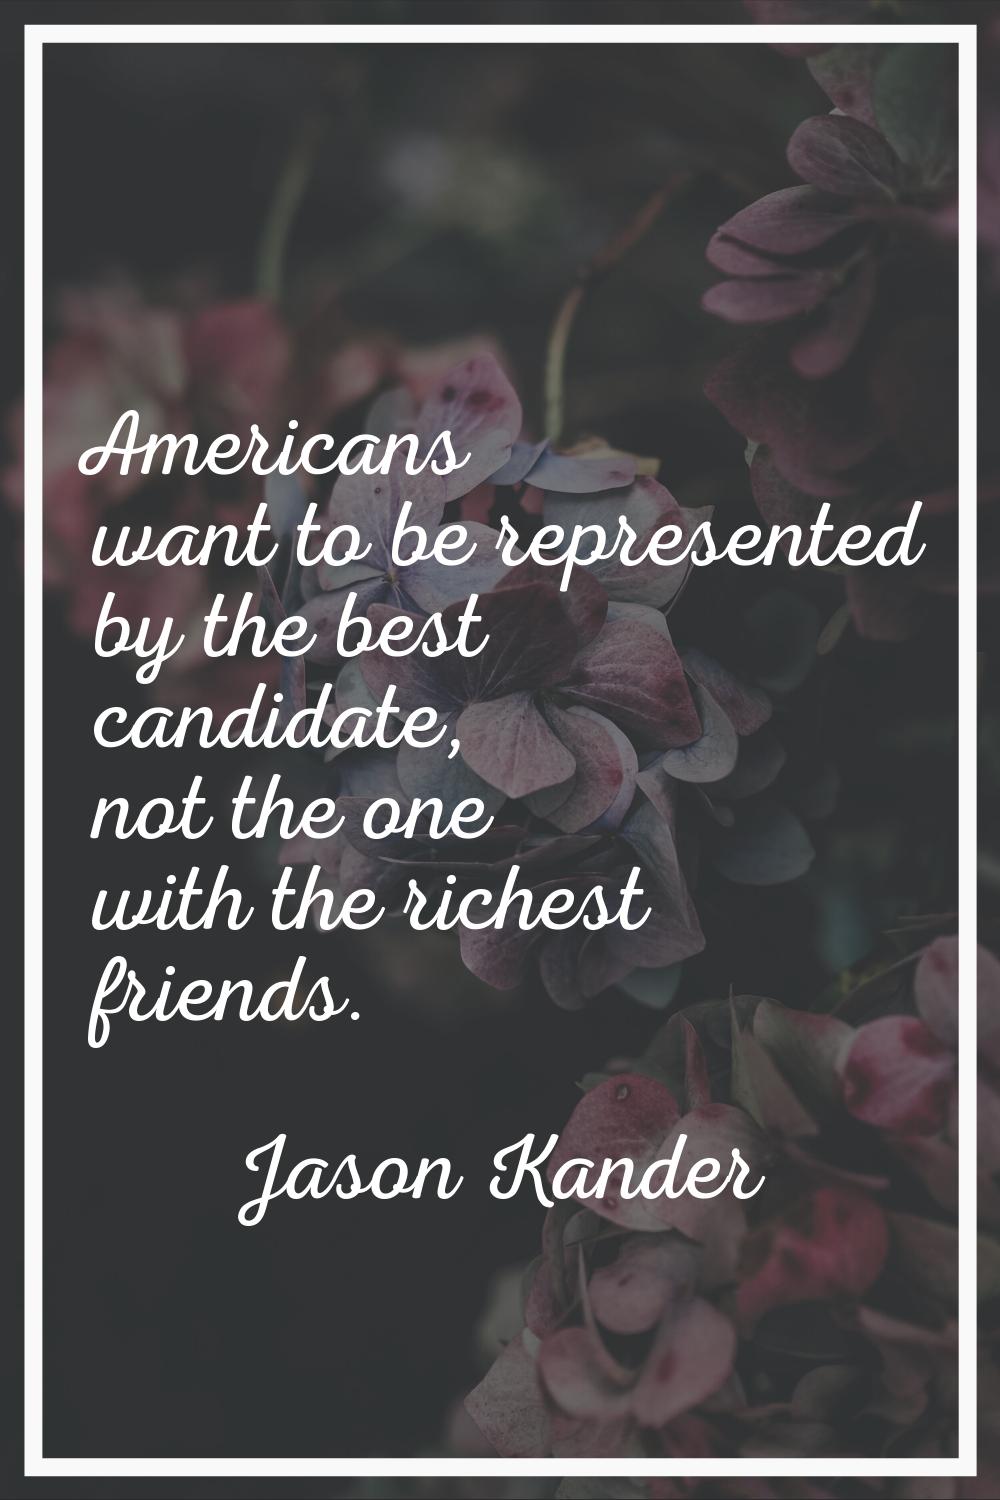 Americans want to be represented by the best candidate, not the one with the richest friends.